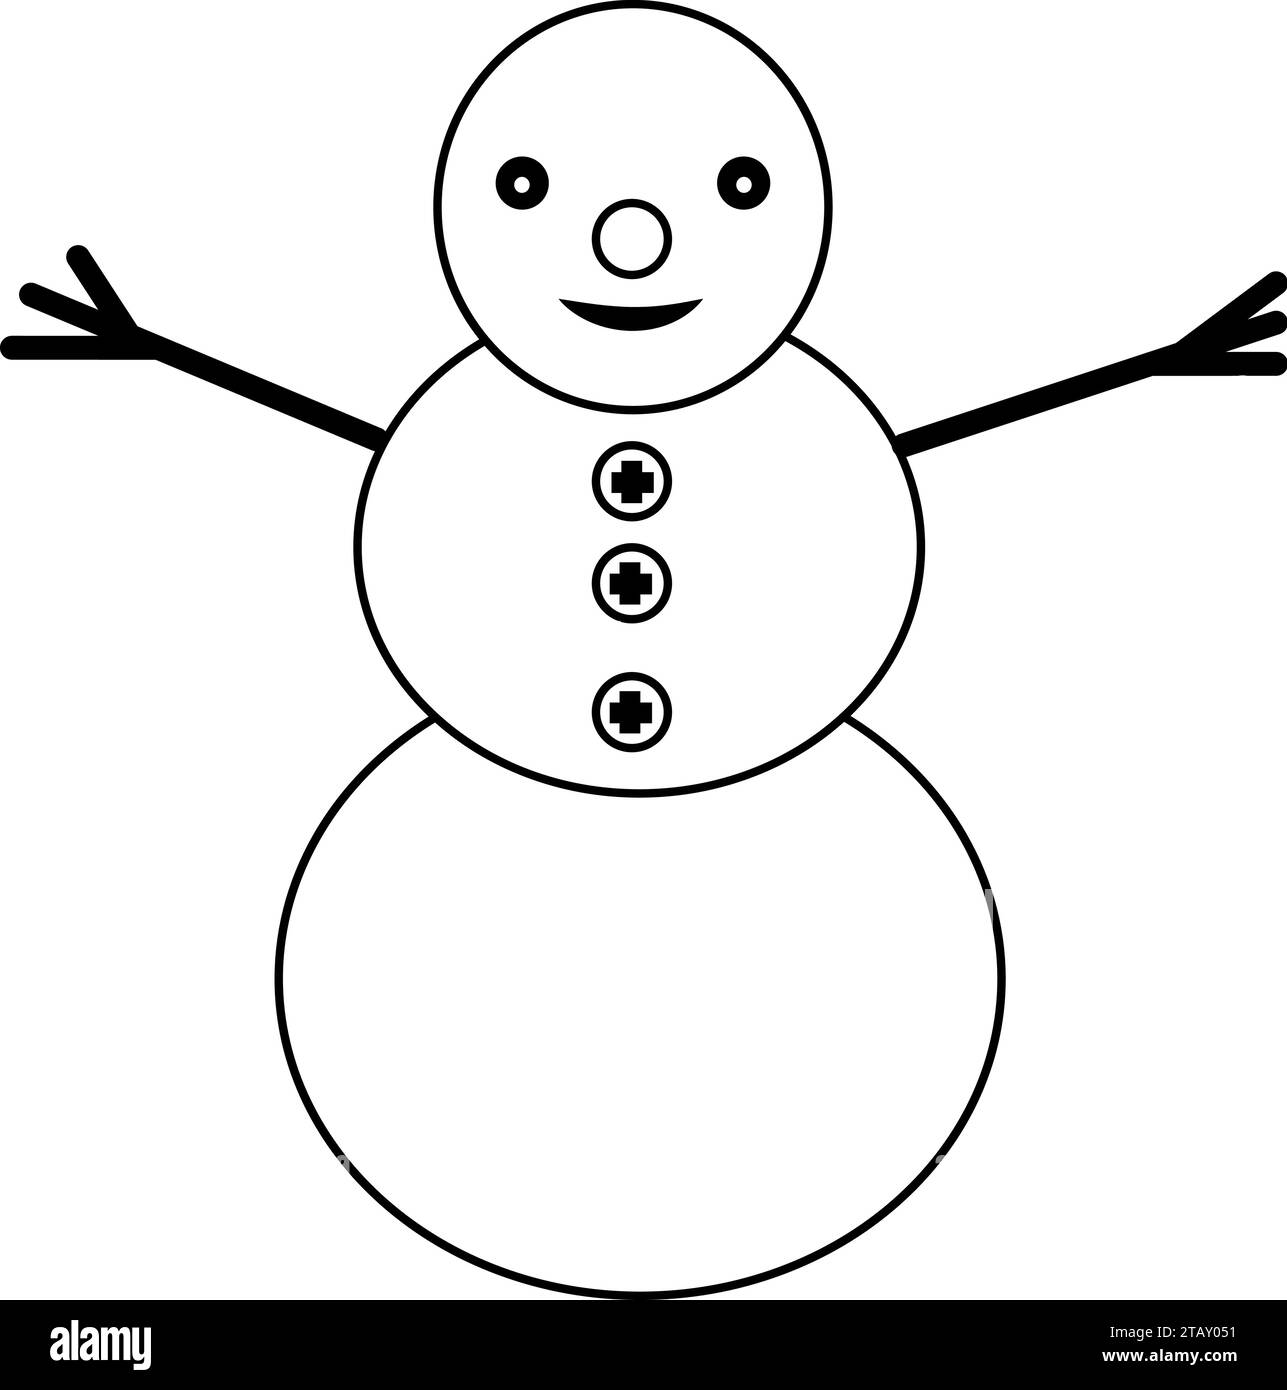 Cute Snowman Character Icon, Black And White Coloring Page Outline Of A Snowman With A Broom, Snowman wearing hat and scarf Stock Vector